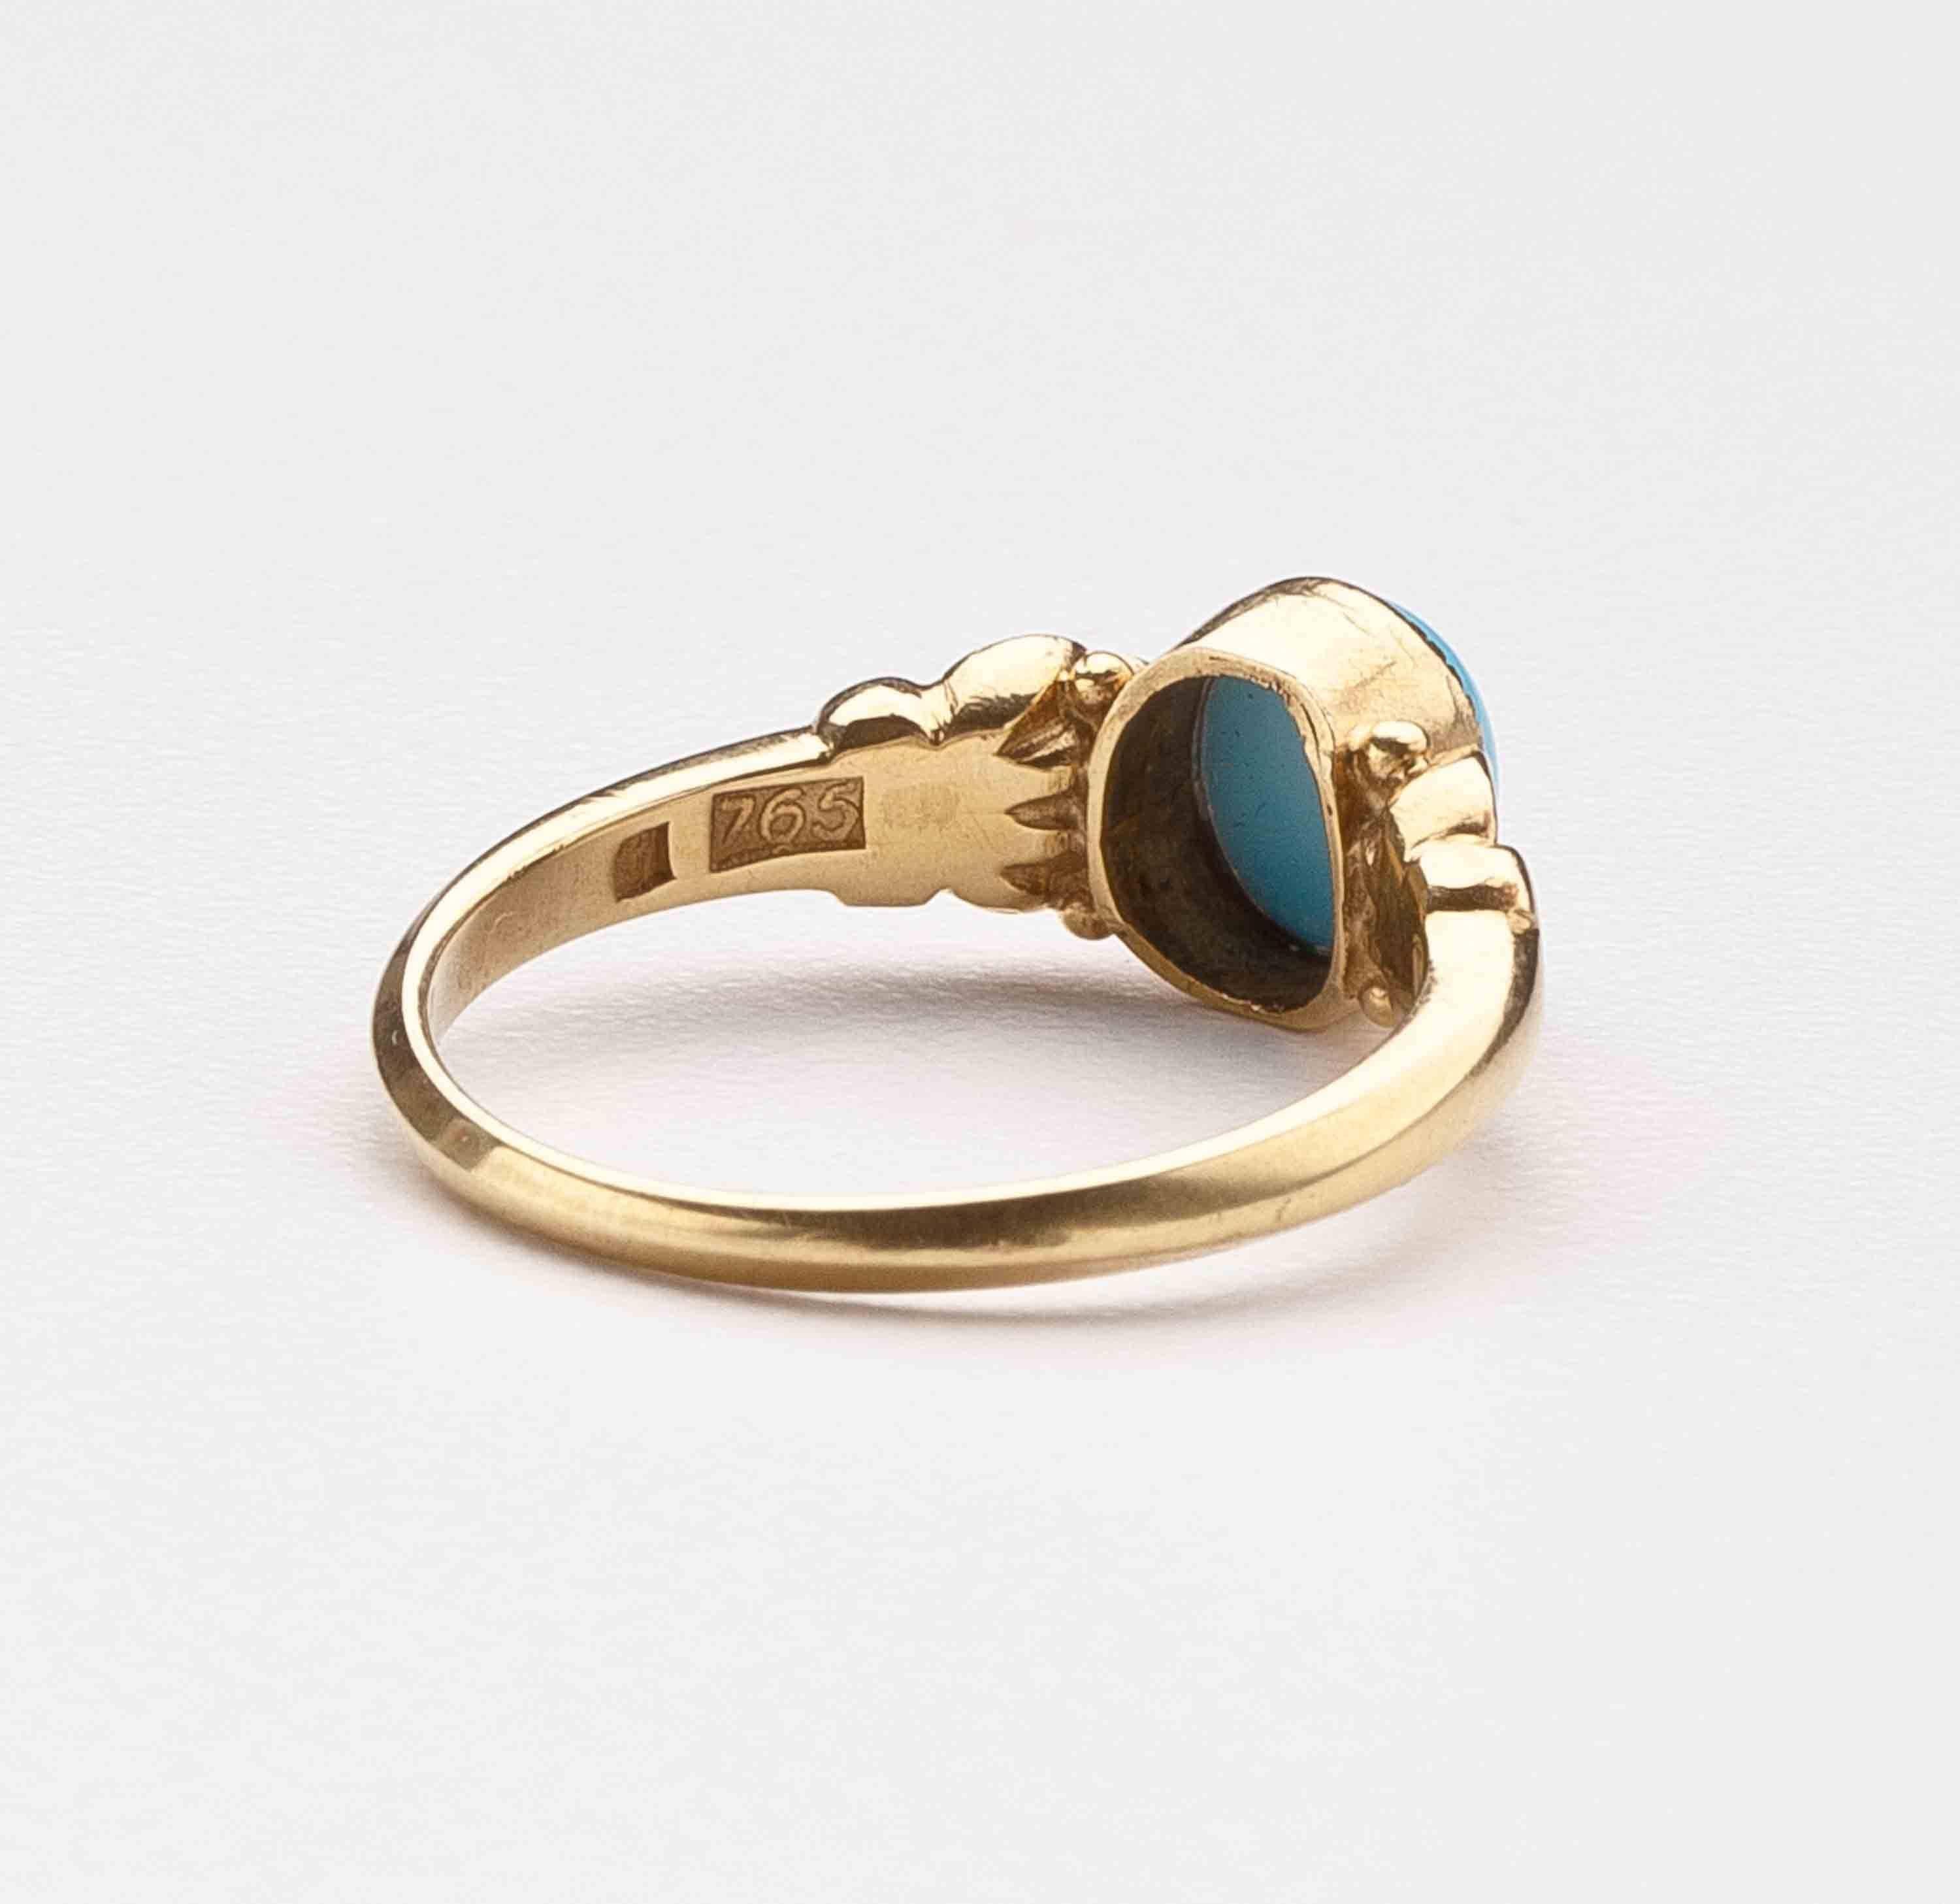 Art Nouveau Georg Jensen Turquoise Gold Ring No. 175  For Sale